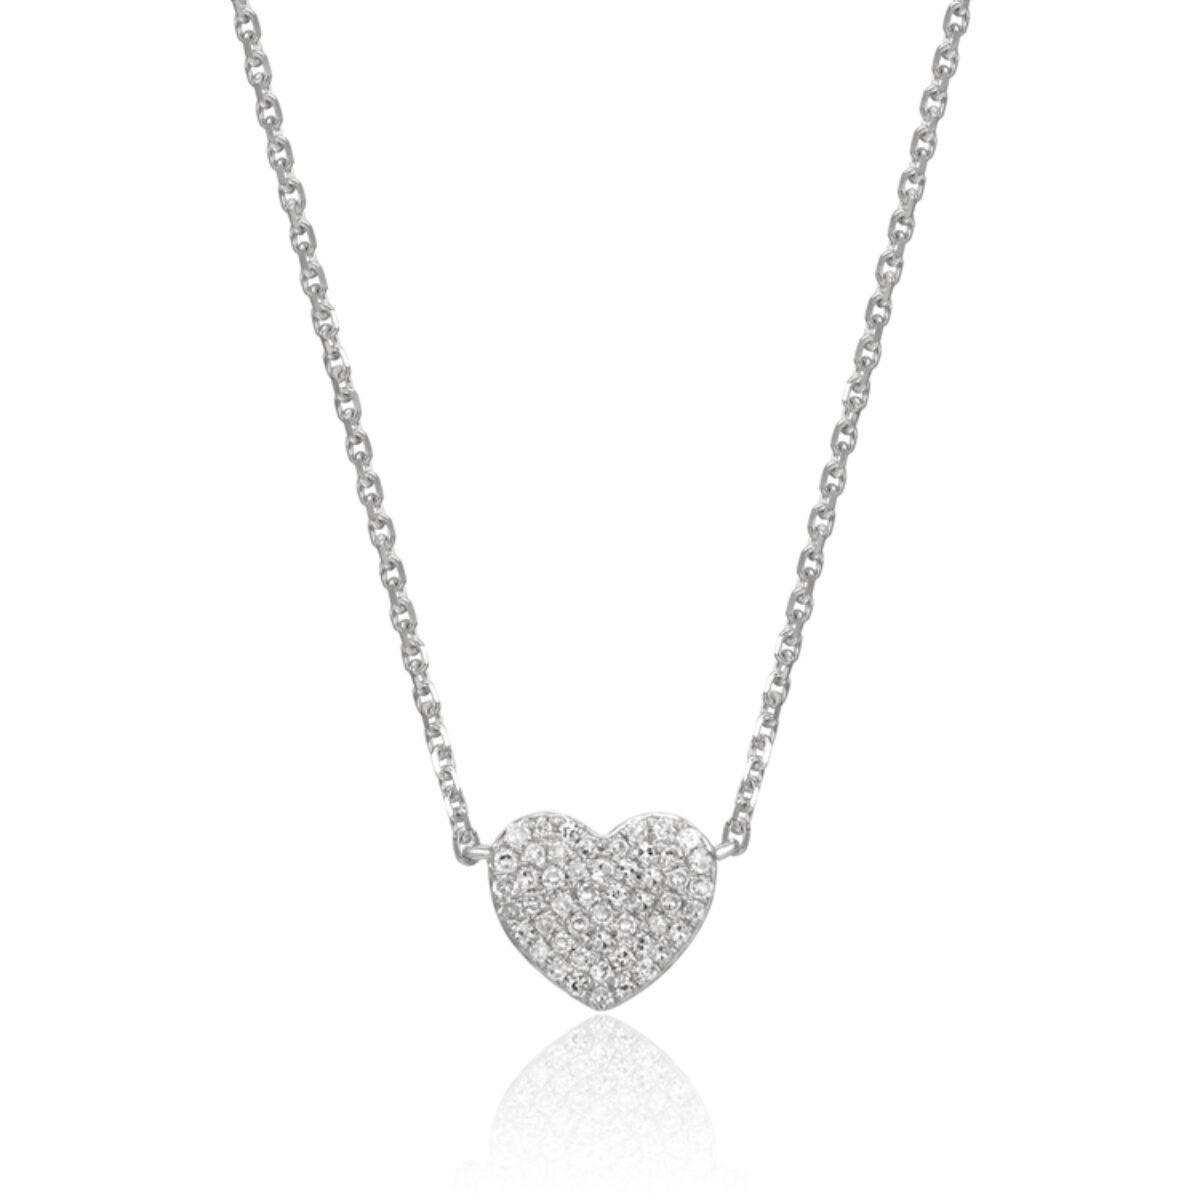 Heart Shaped pendant necklace covered in diamonds set in white gold